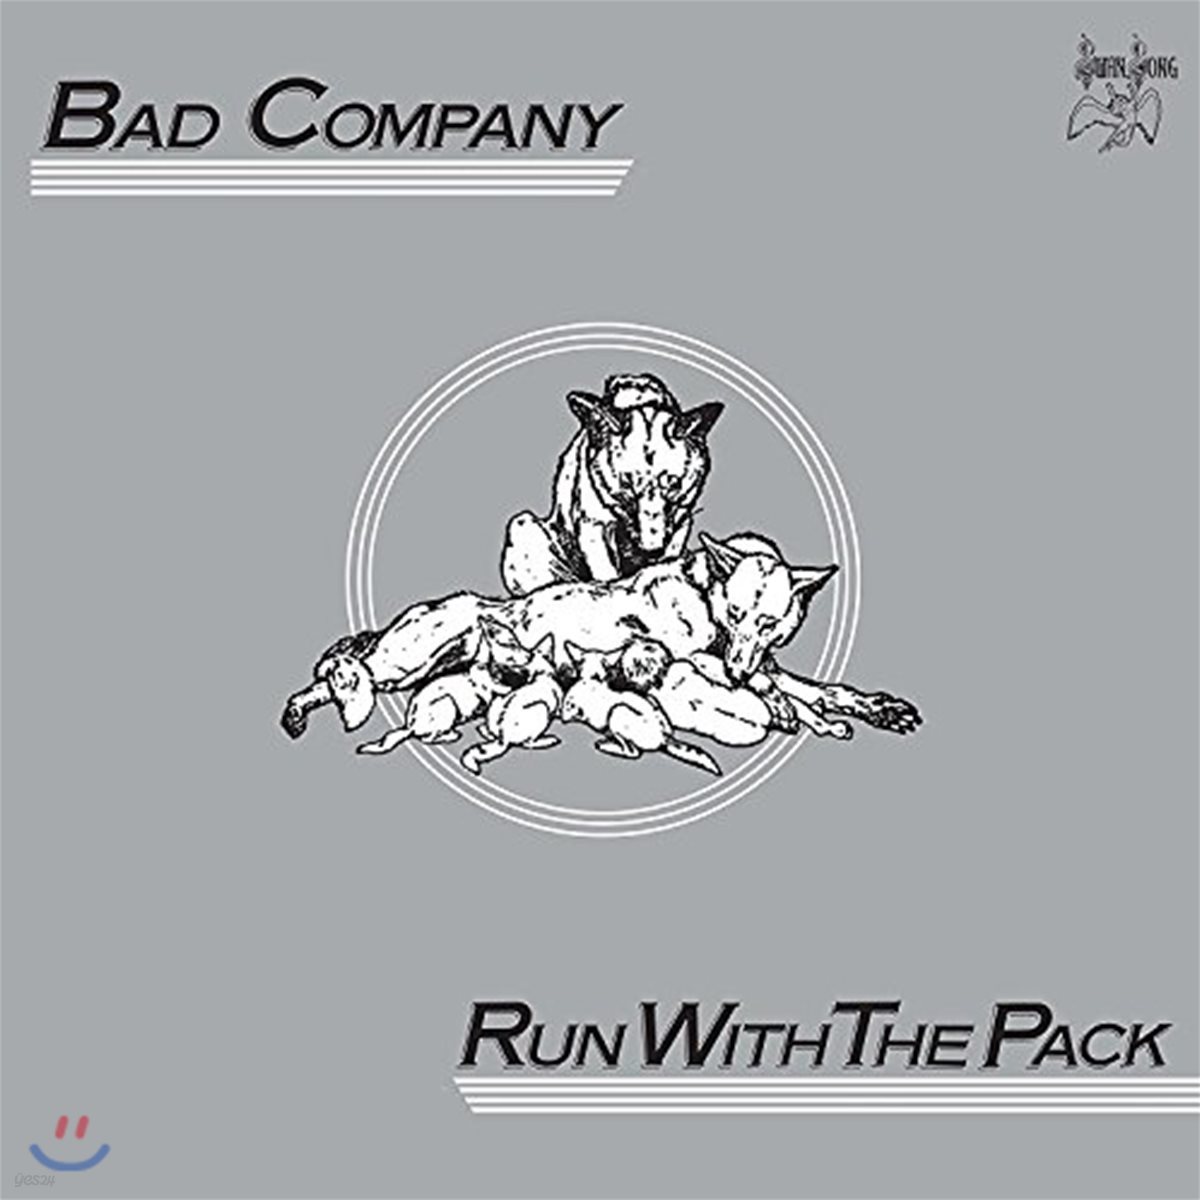 Bad Company (배드 컴패니) - Run With The Pack [Deluxe Edition]